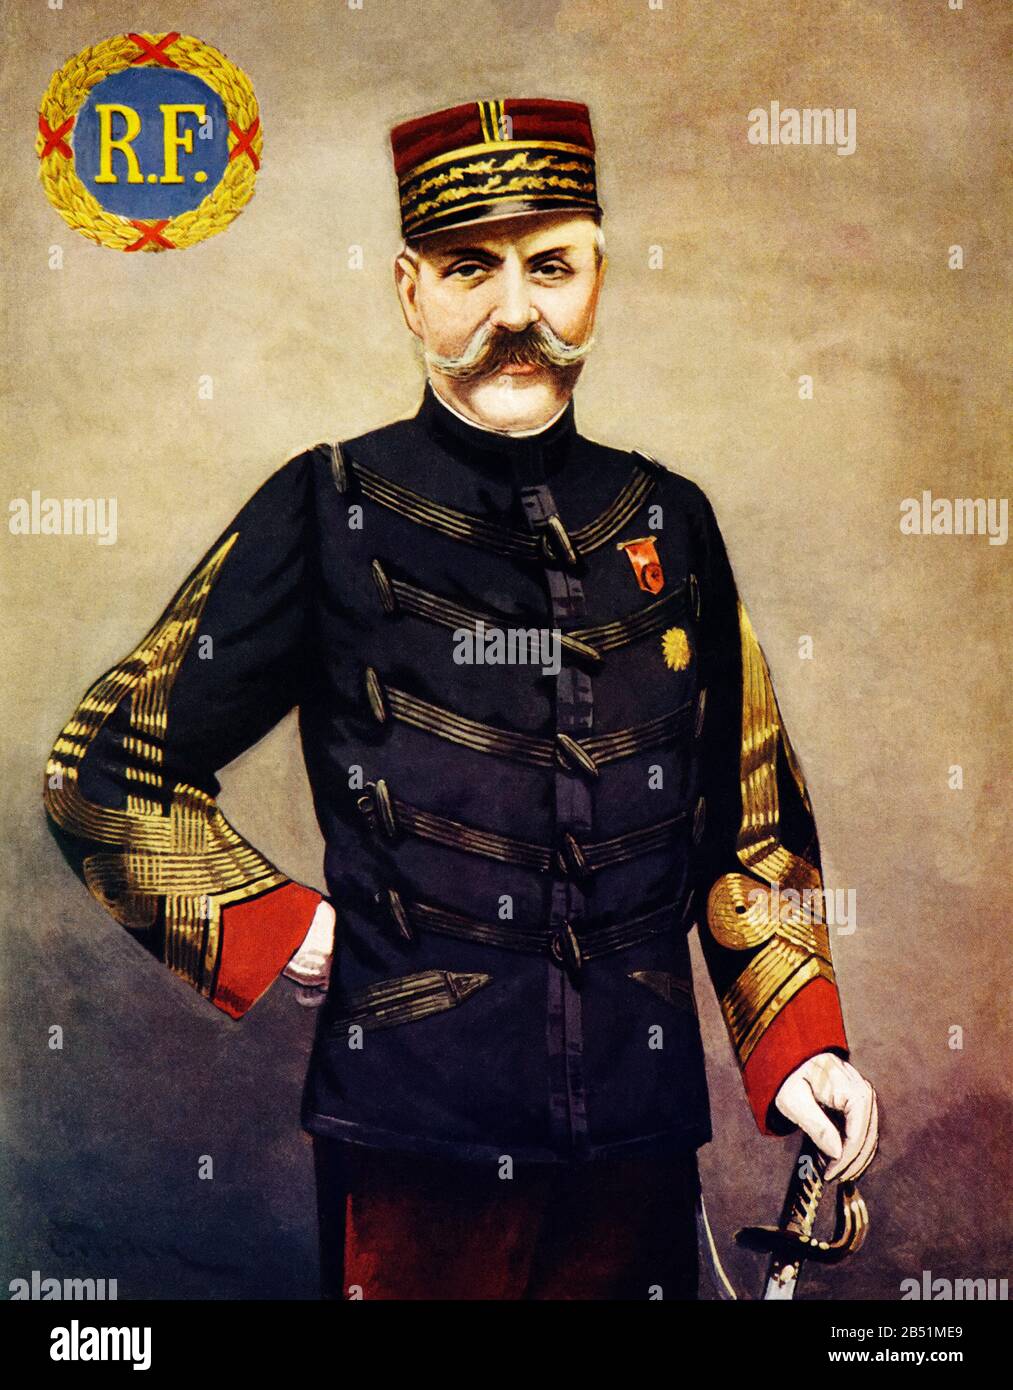 Color portrait of Ferdinand Jean Marie Foch (Tarbes 1851 - 1929), was a French marshal and commander in chief of the Allied armies during the First Wo Stock Photo